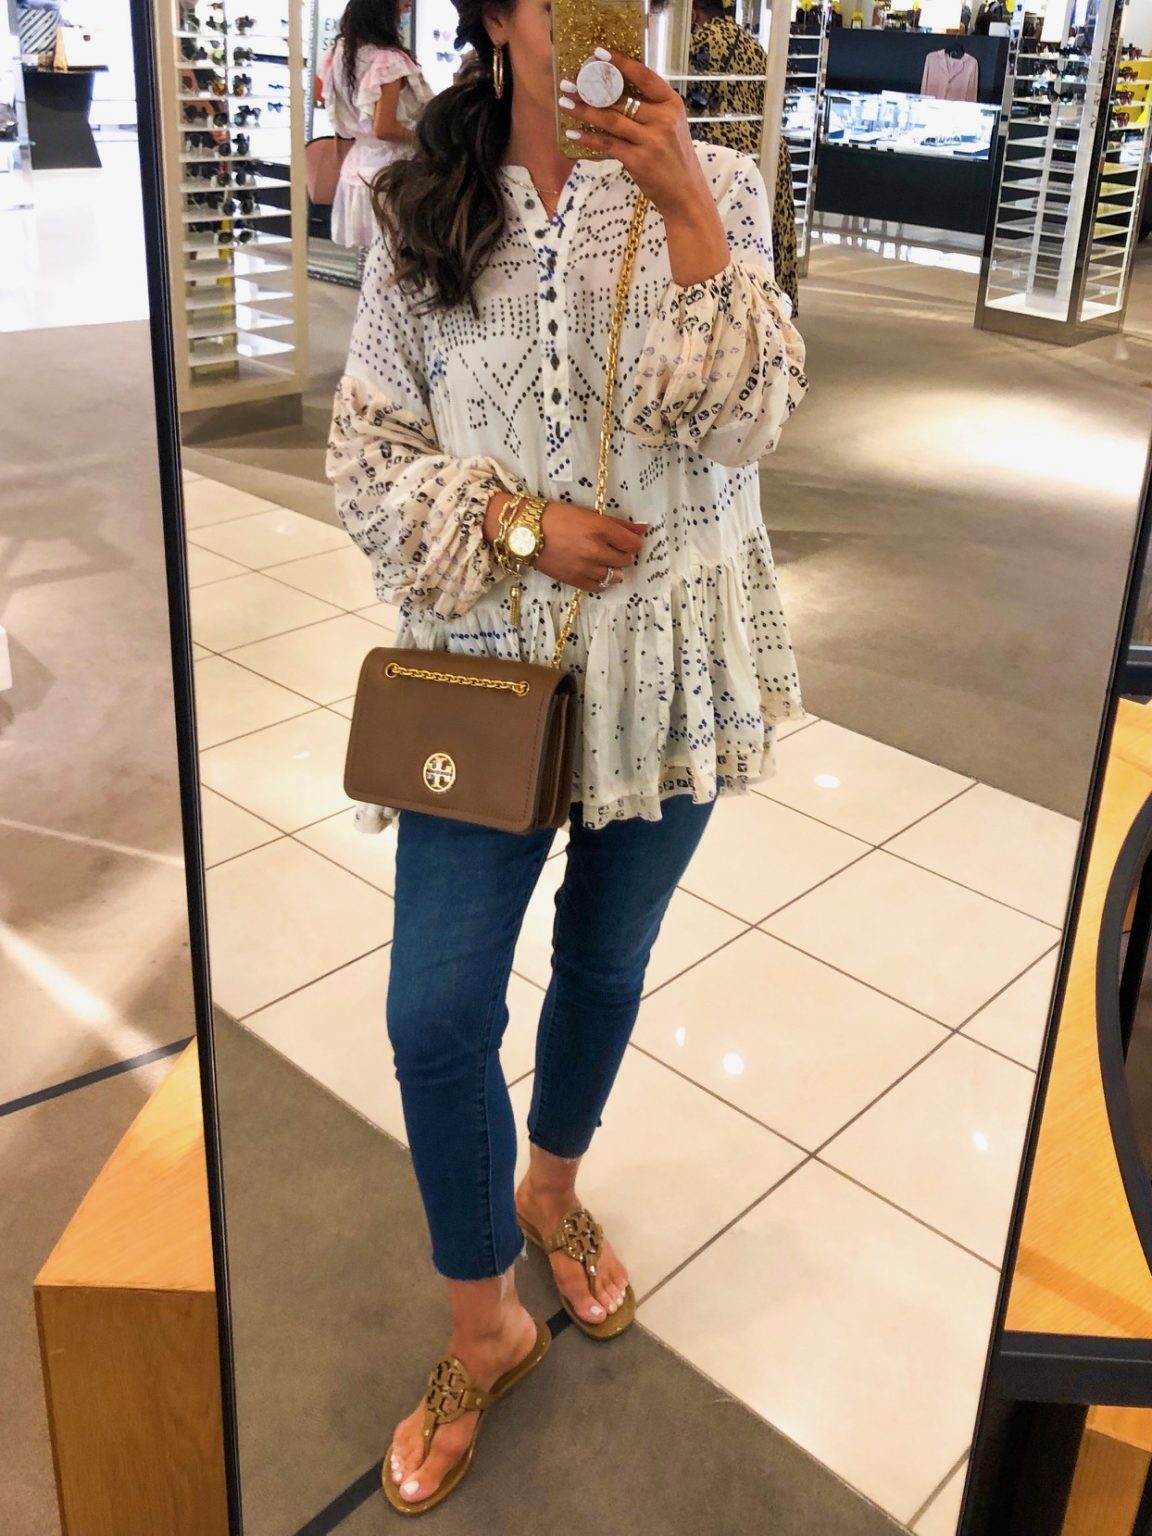 NSALE 2020 Early Access Dressing Room Diaries + More! - The Double Take ...